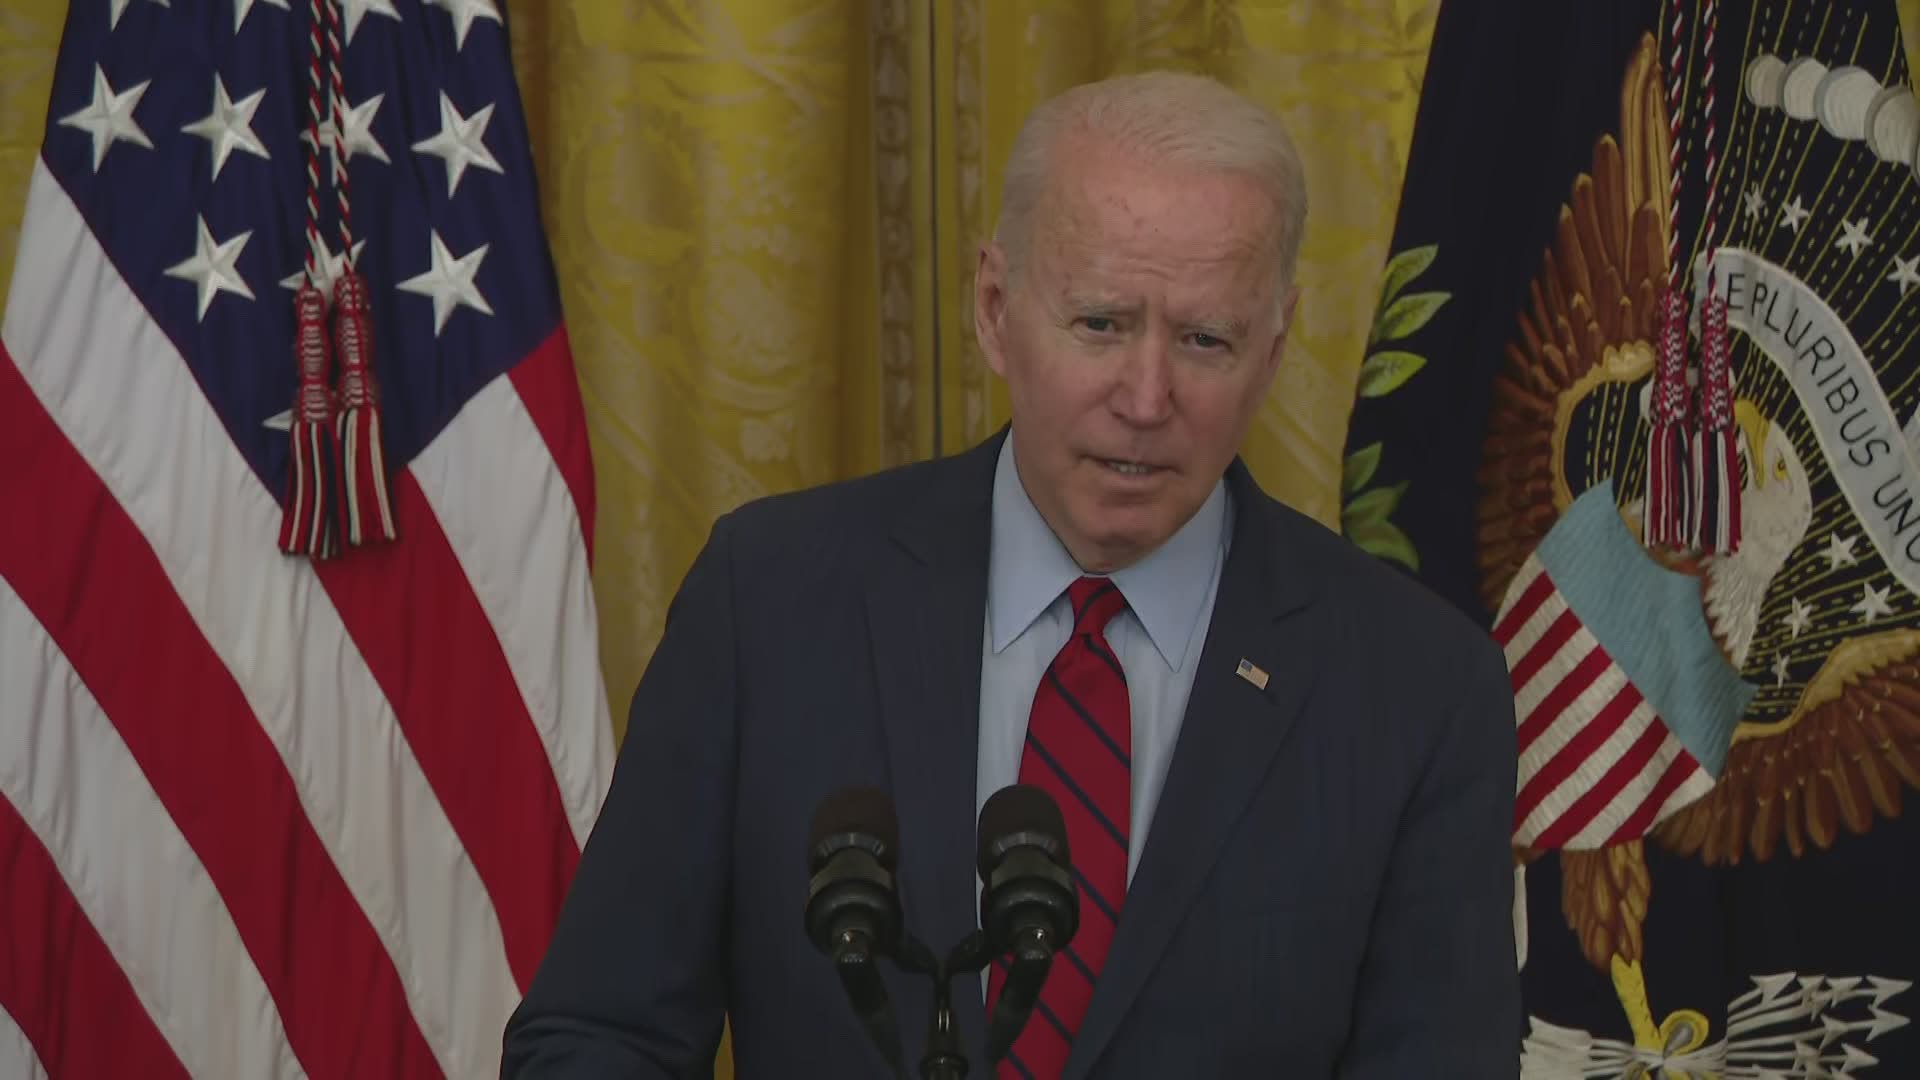 President Joe Biden announced a bipartisan agreement on a $953 billion infrastructure plan, one of his top priorities.